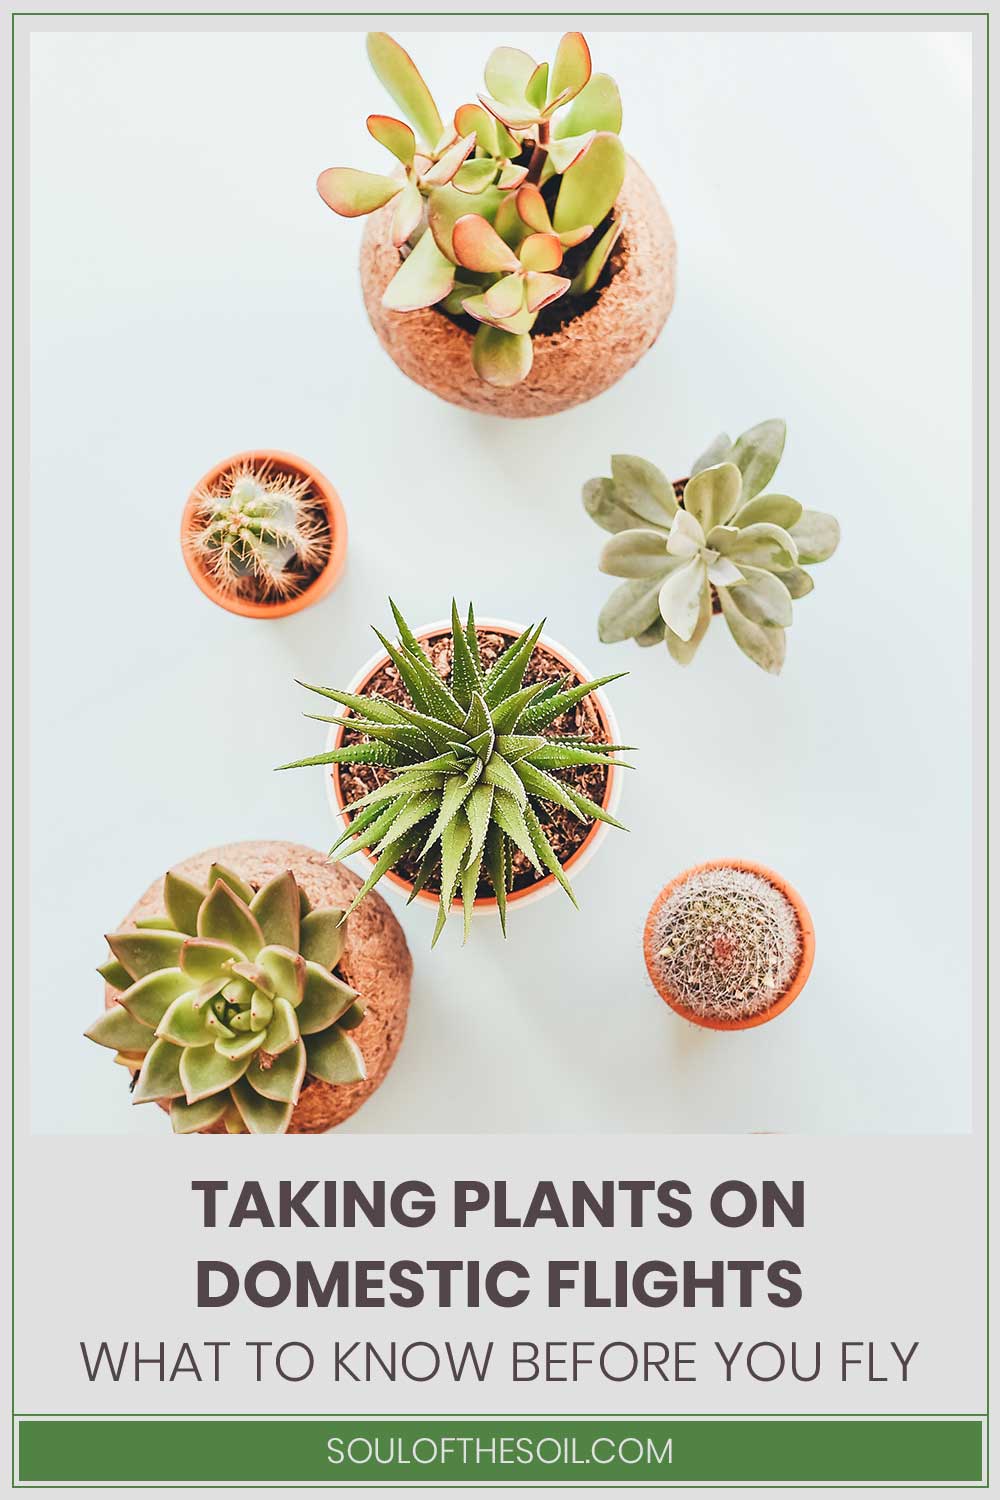 Taking Plants On Domestic Flights – What to Know Before You Fly